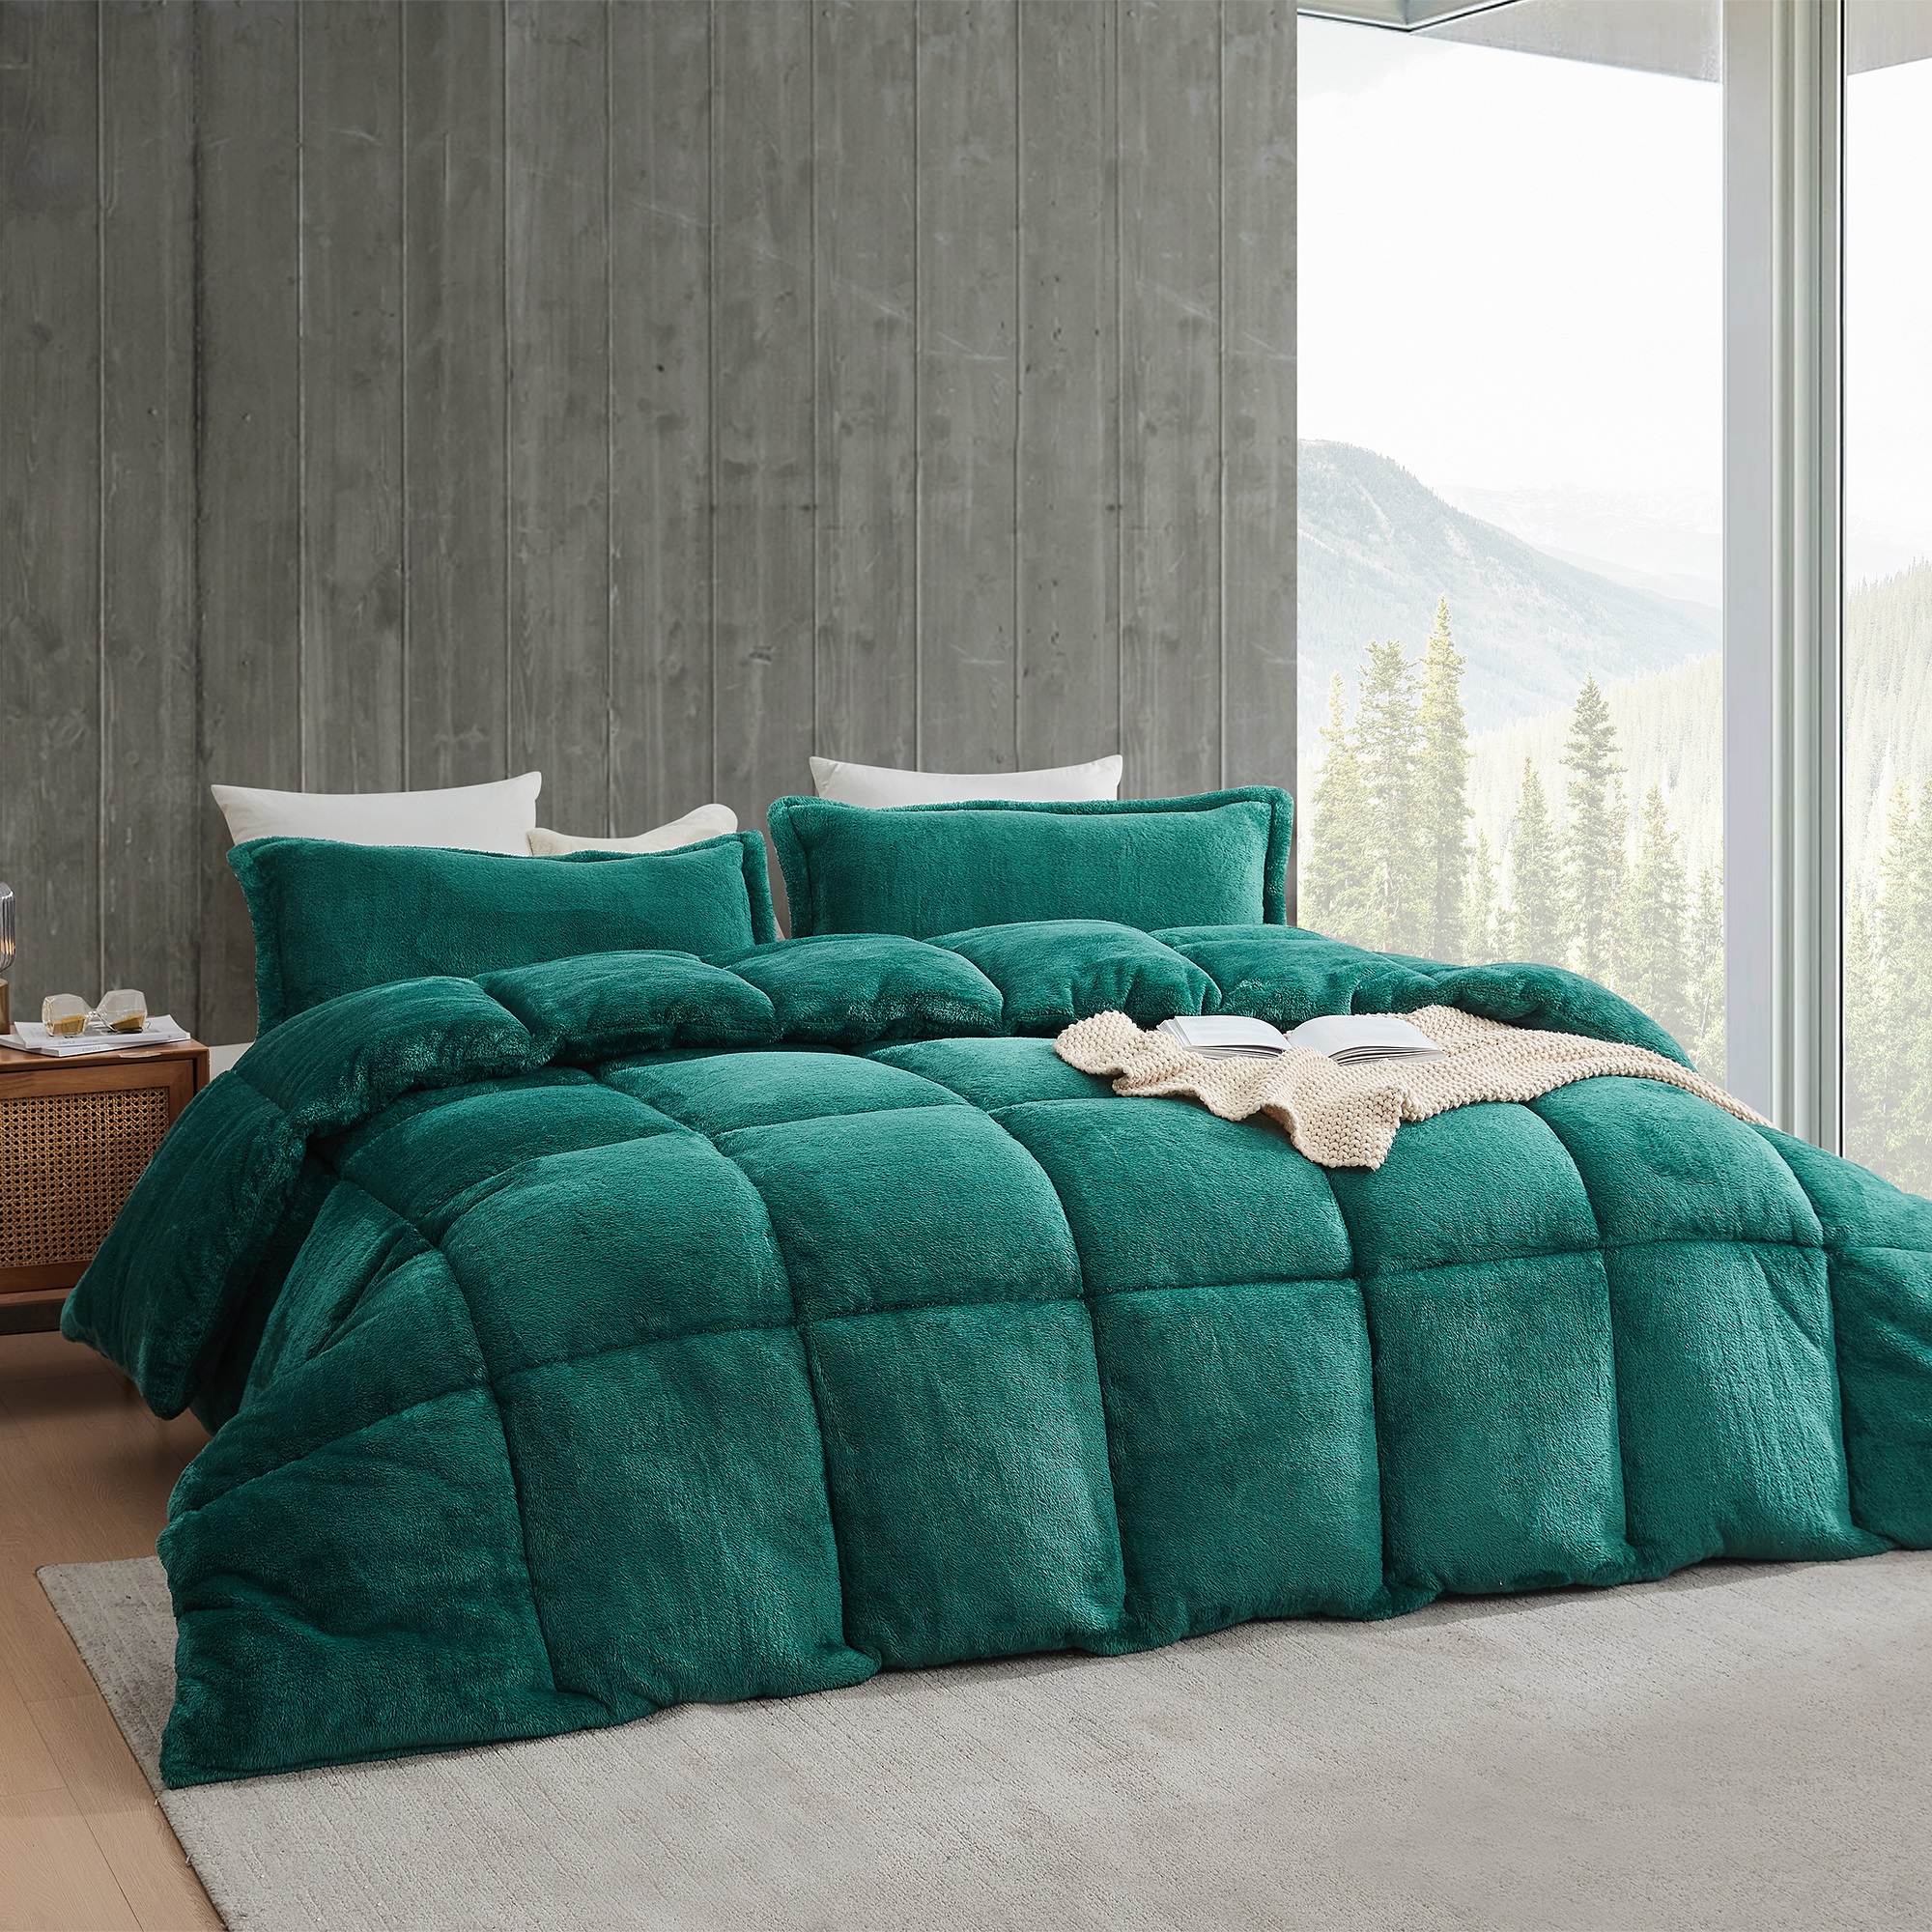 Me Comforter ATE Your Comforter - Coma Inducer® Oversized Comforter - Evergreen